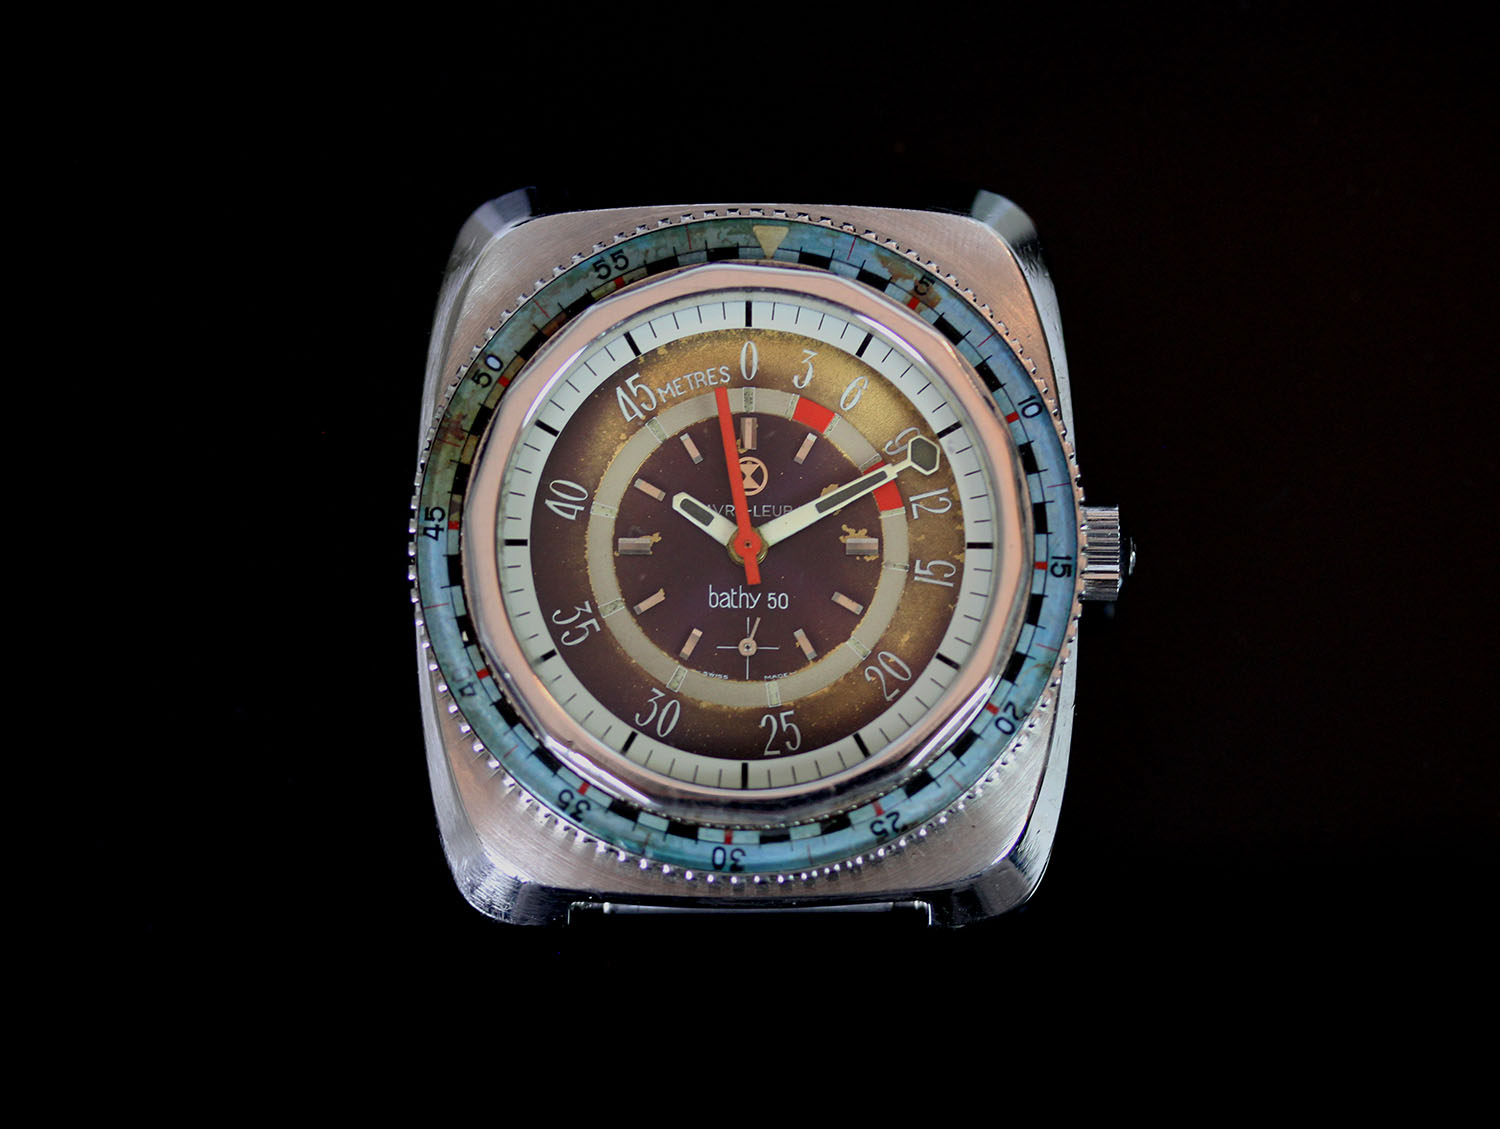 GENTLEMANS RARE FAVRE -LEUBA BATHY 50 VINTAGE DIVERS WATCH,round, two tone dial with illuminated